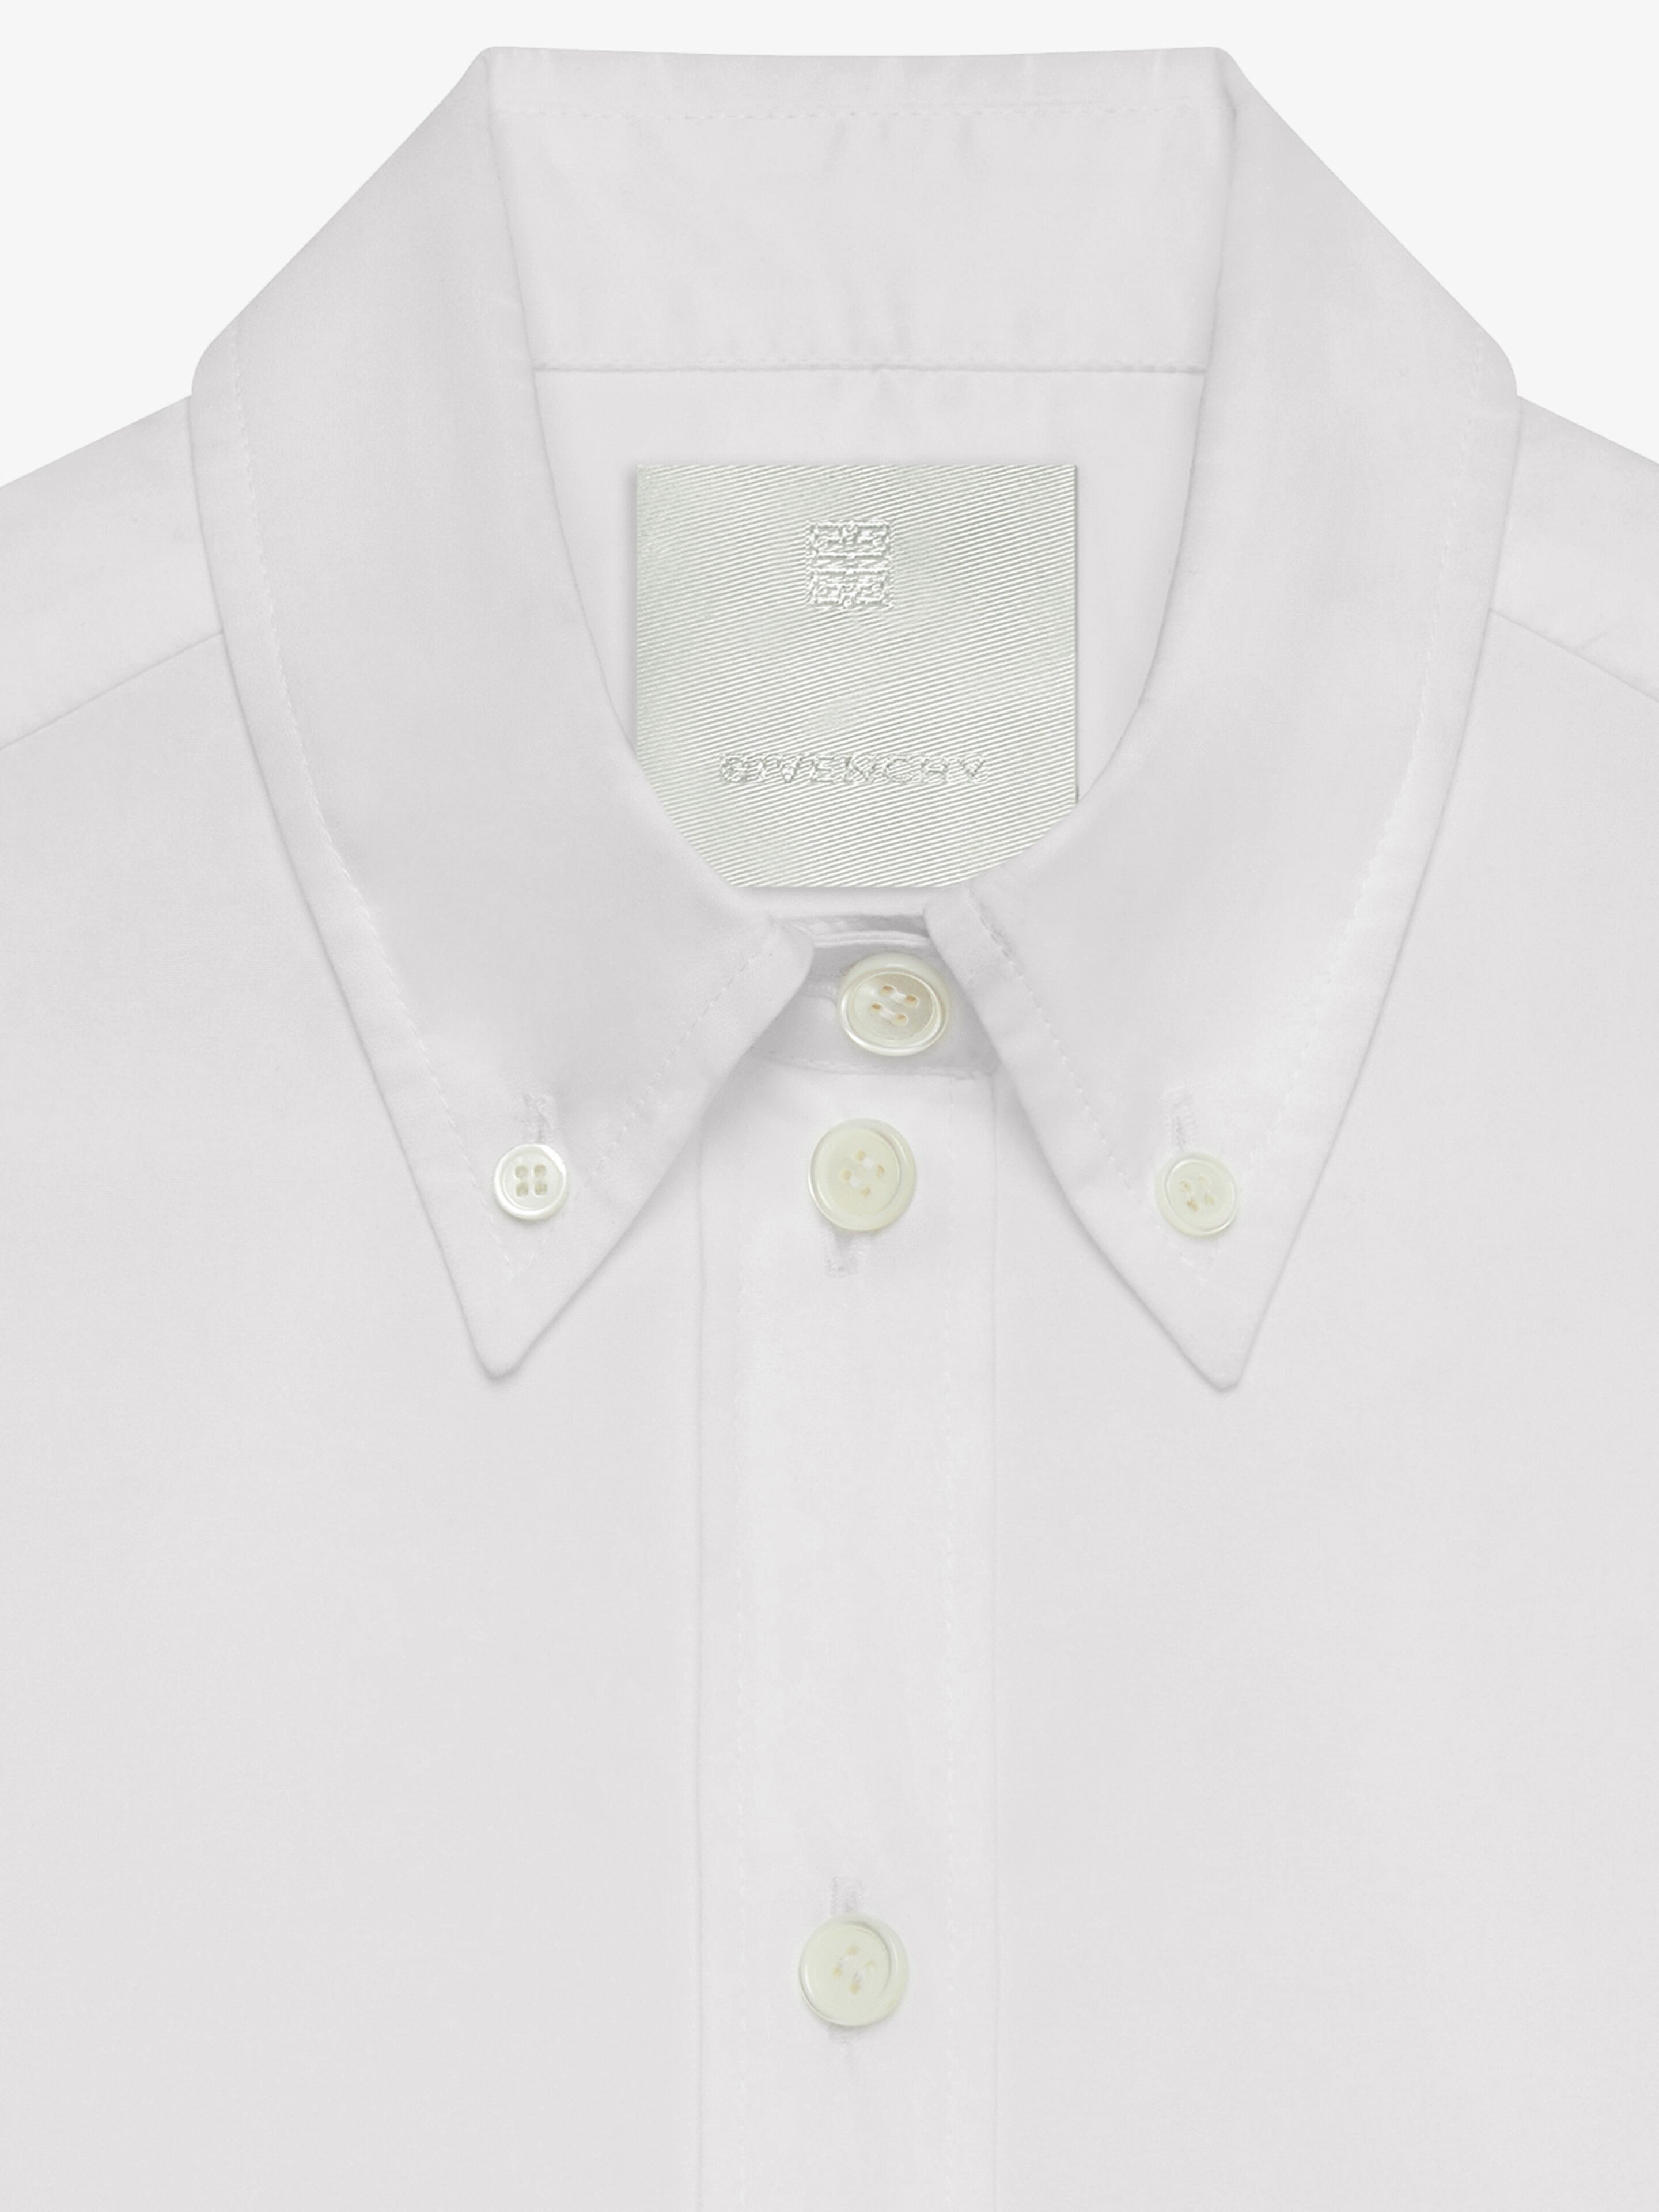 CLASSIC OXFORD SHIRT IN EMBROIDERED POPLIN - 5